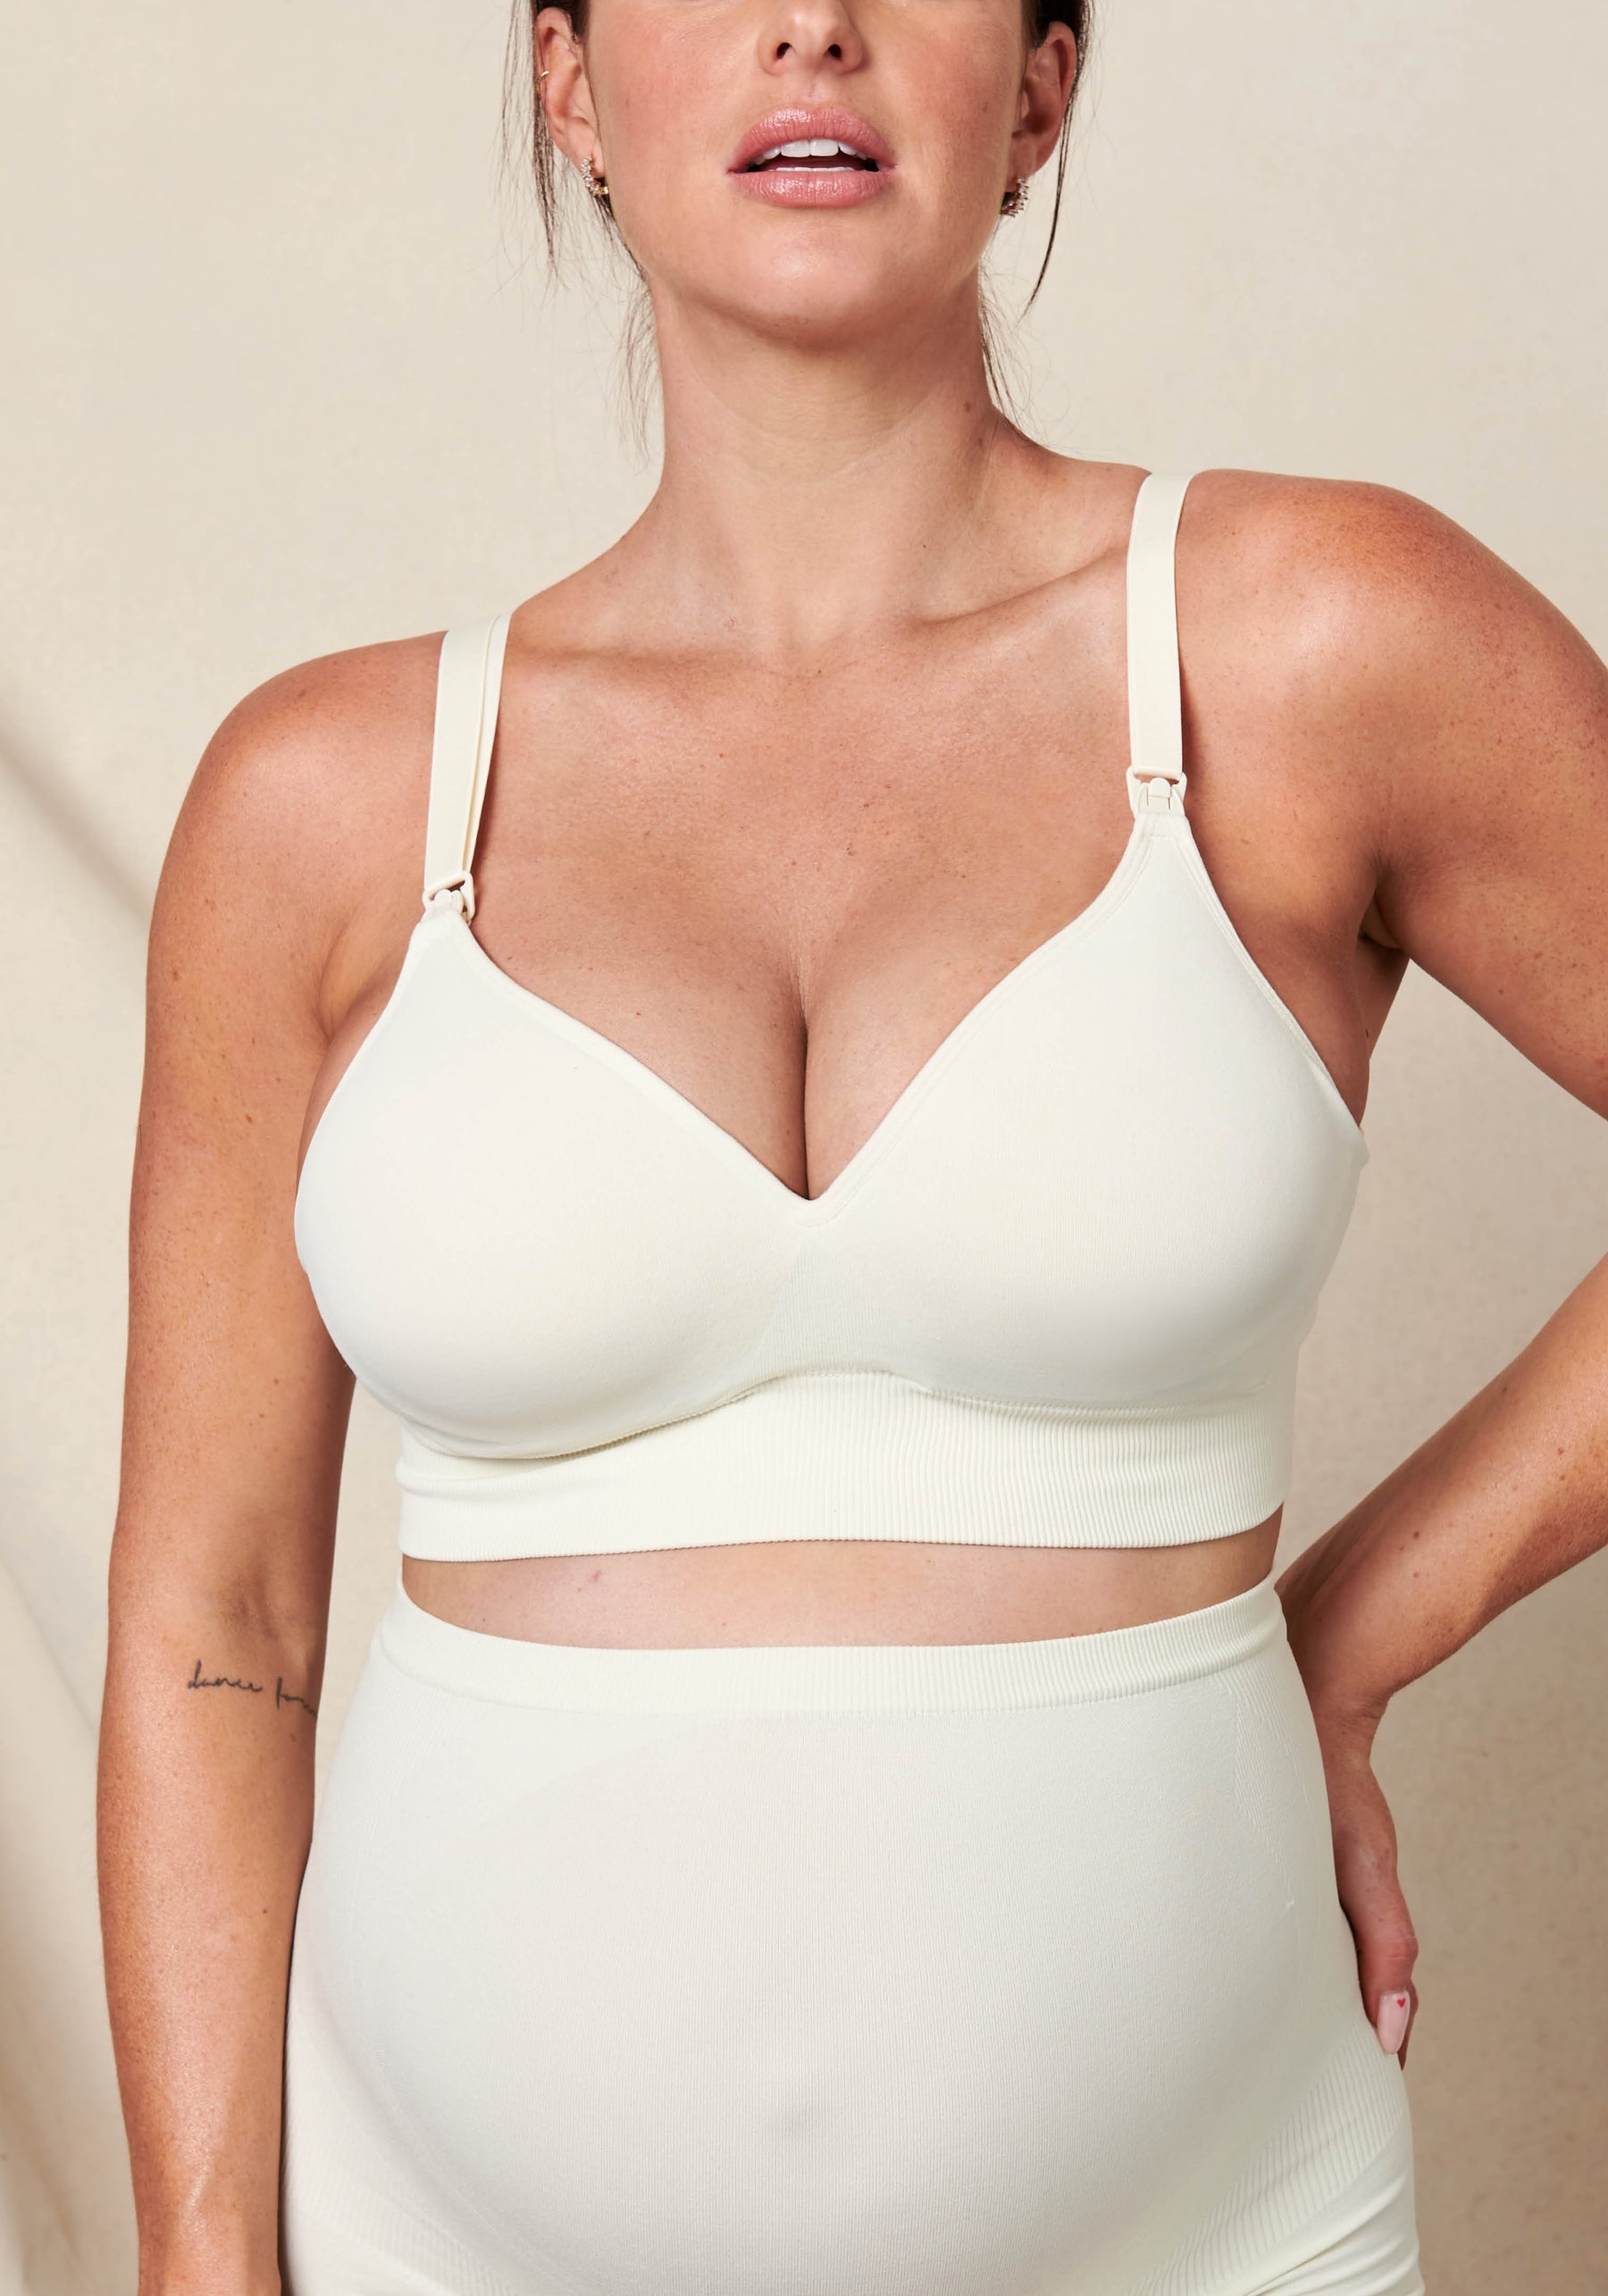 Tired of leaky and stained nursing bras?!? Check this out! 🥛 Not